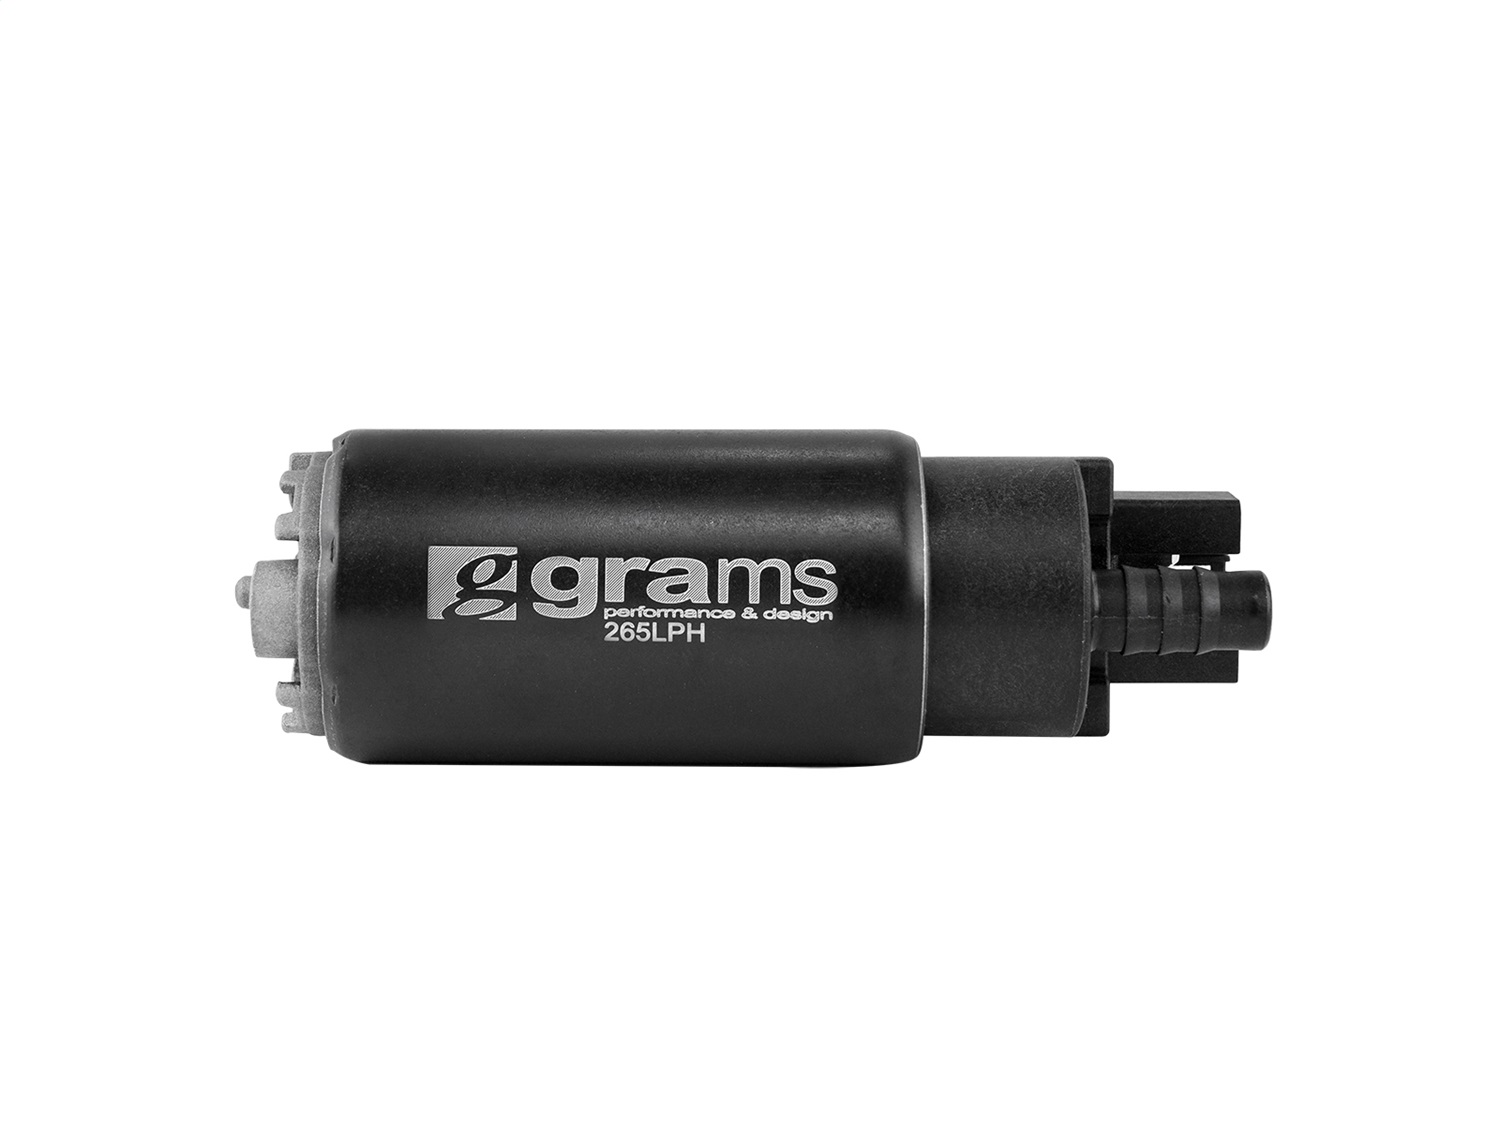 Grams Performance and Design G51-99-0265 Electric Fuel Pump Kit